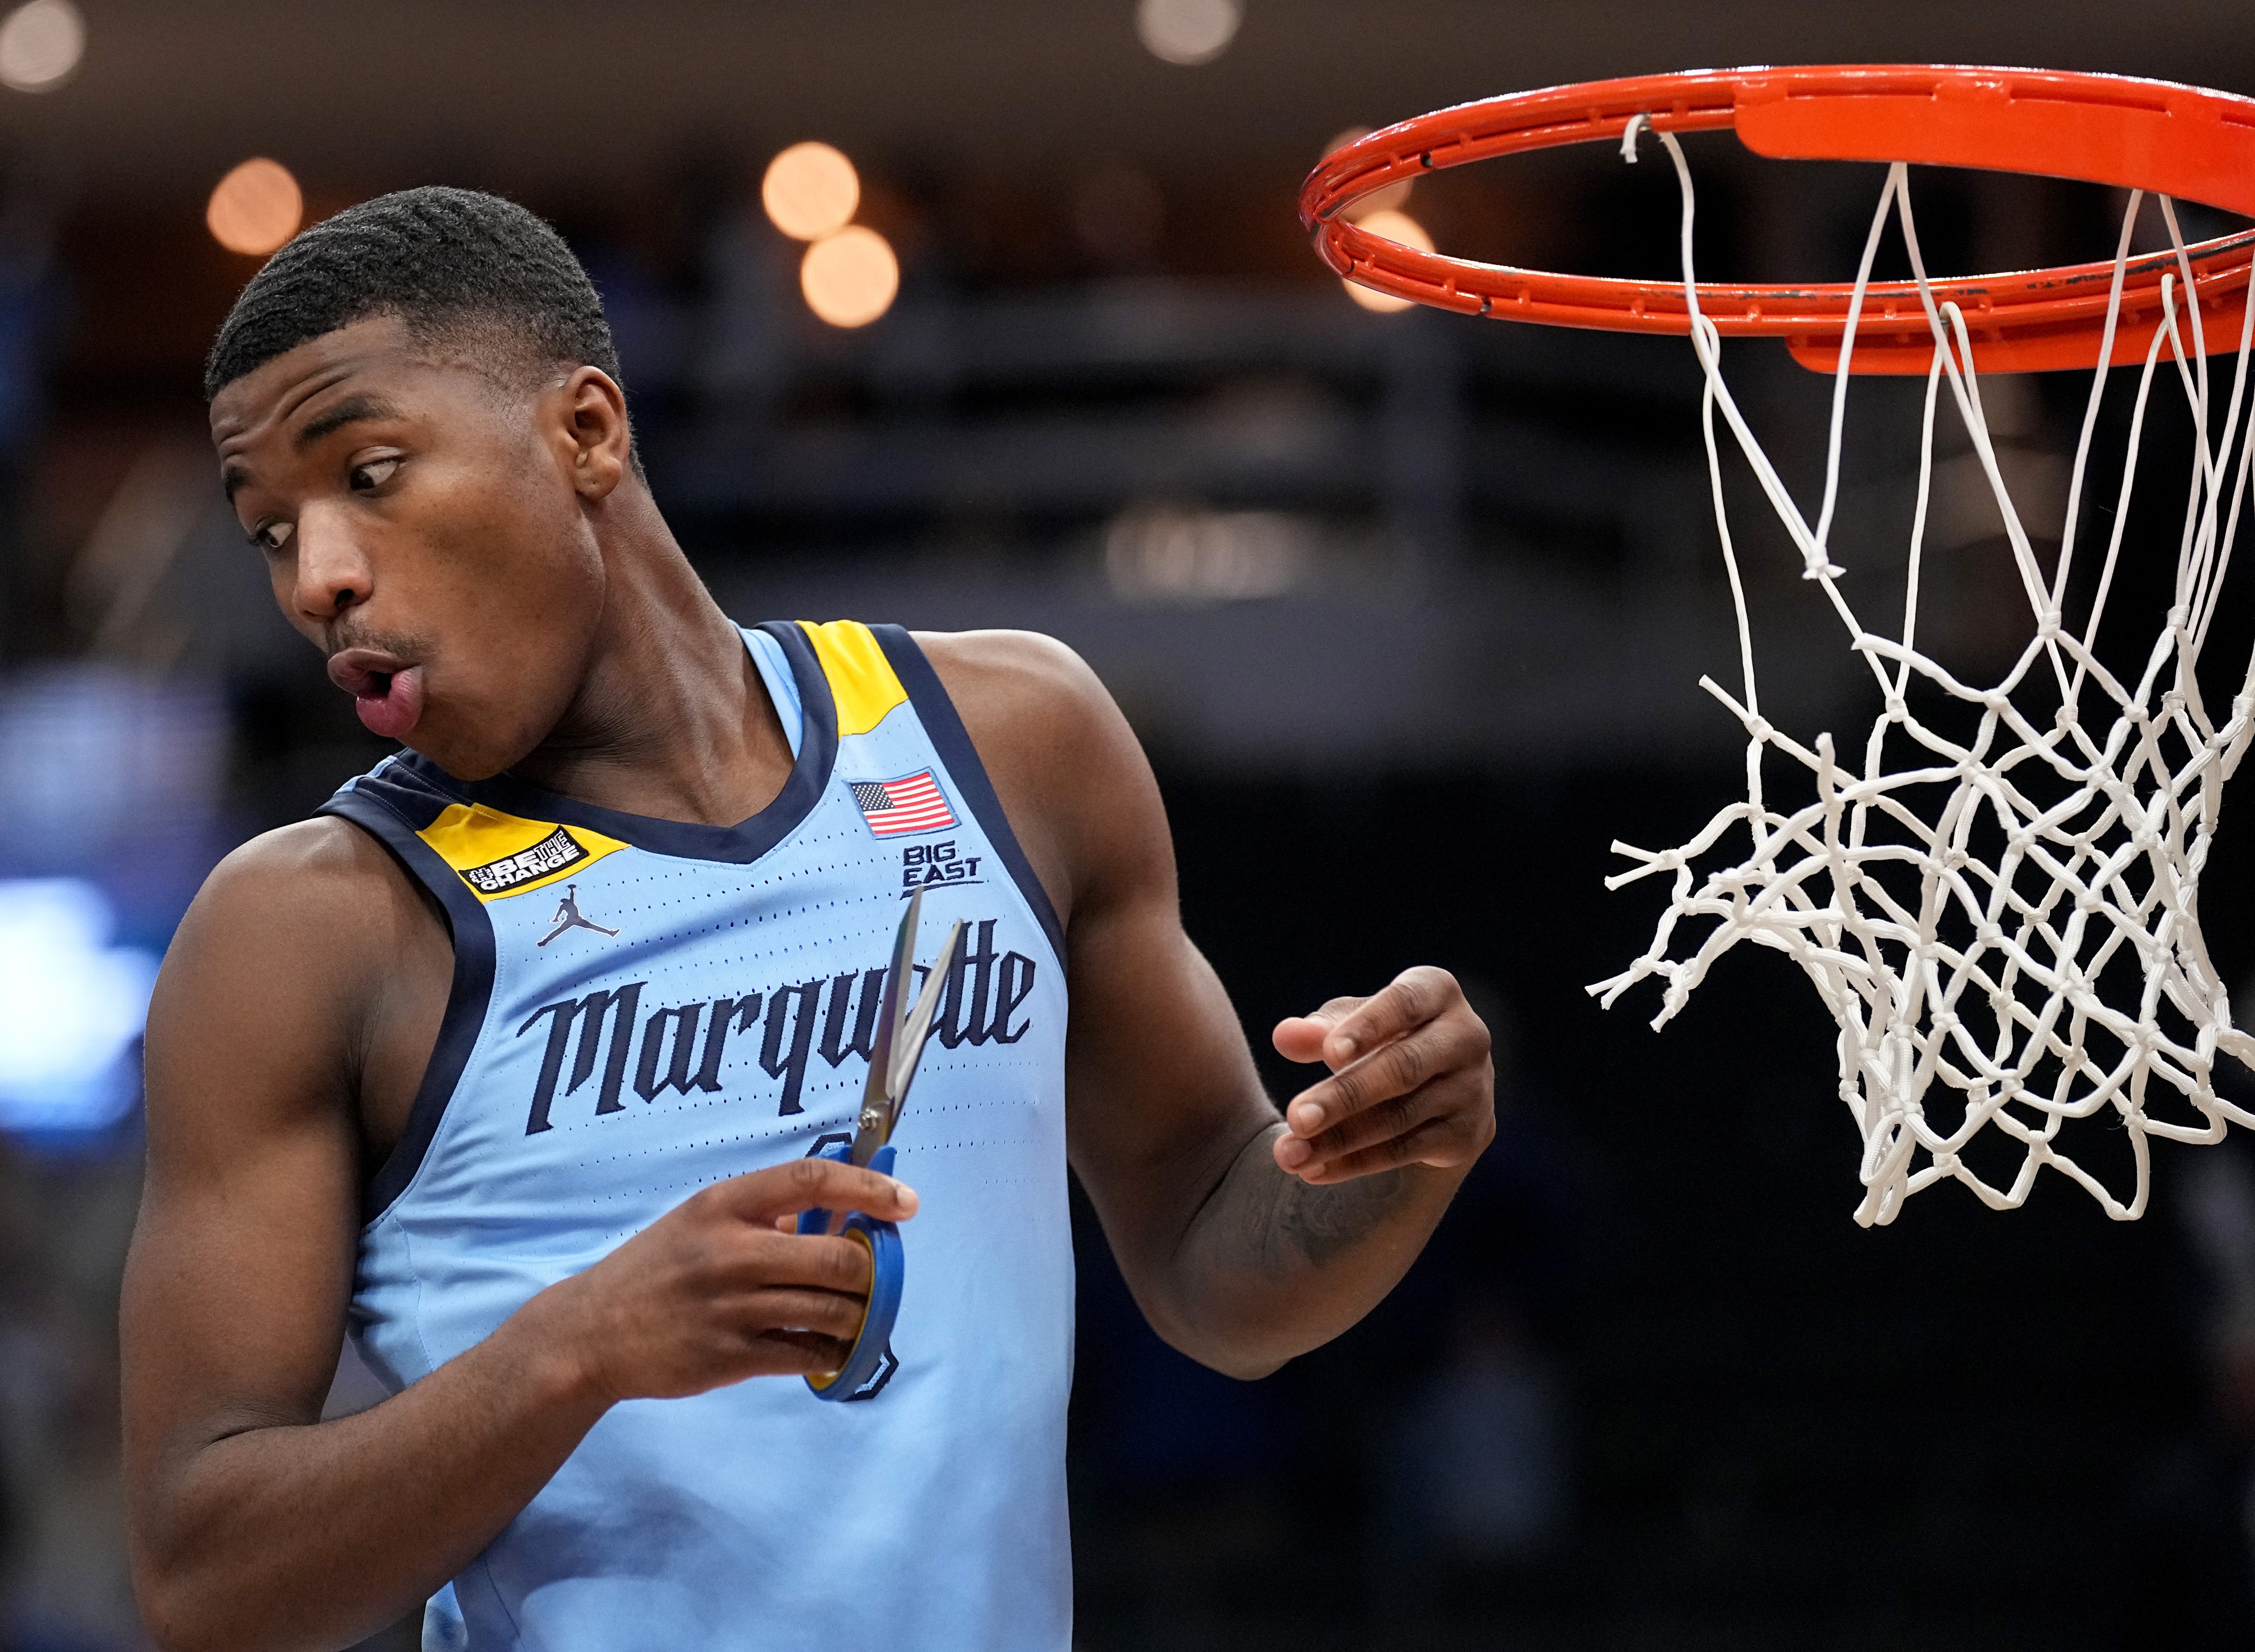 Kam Jones has unfinished work at Marquette. That's why he spurned the NBA and transfer portal